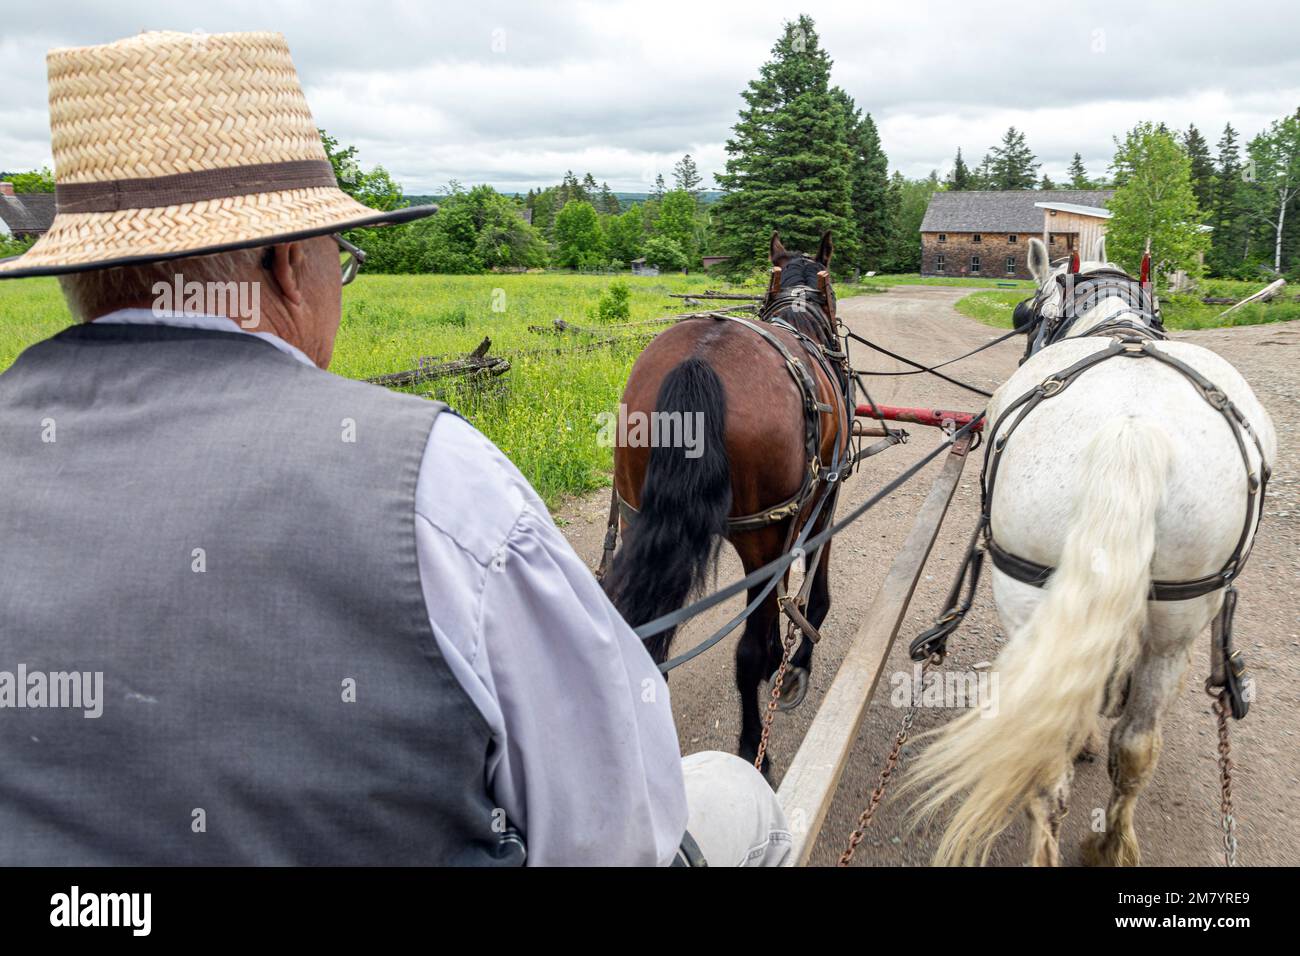 PERIOD HORSE HARNESSING FOR FARM WORK AND TRANSPORT, KINGS LANDING, HISTORIC ANGLOPHONE VILLAGE, PRINCE WILLIAM PARISH, FREDERICTON, NEW BRUNSWICK, CANADA, NORTH AMERICA Stock Photo